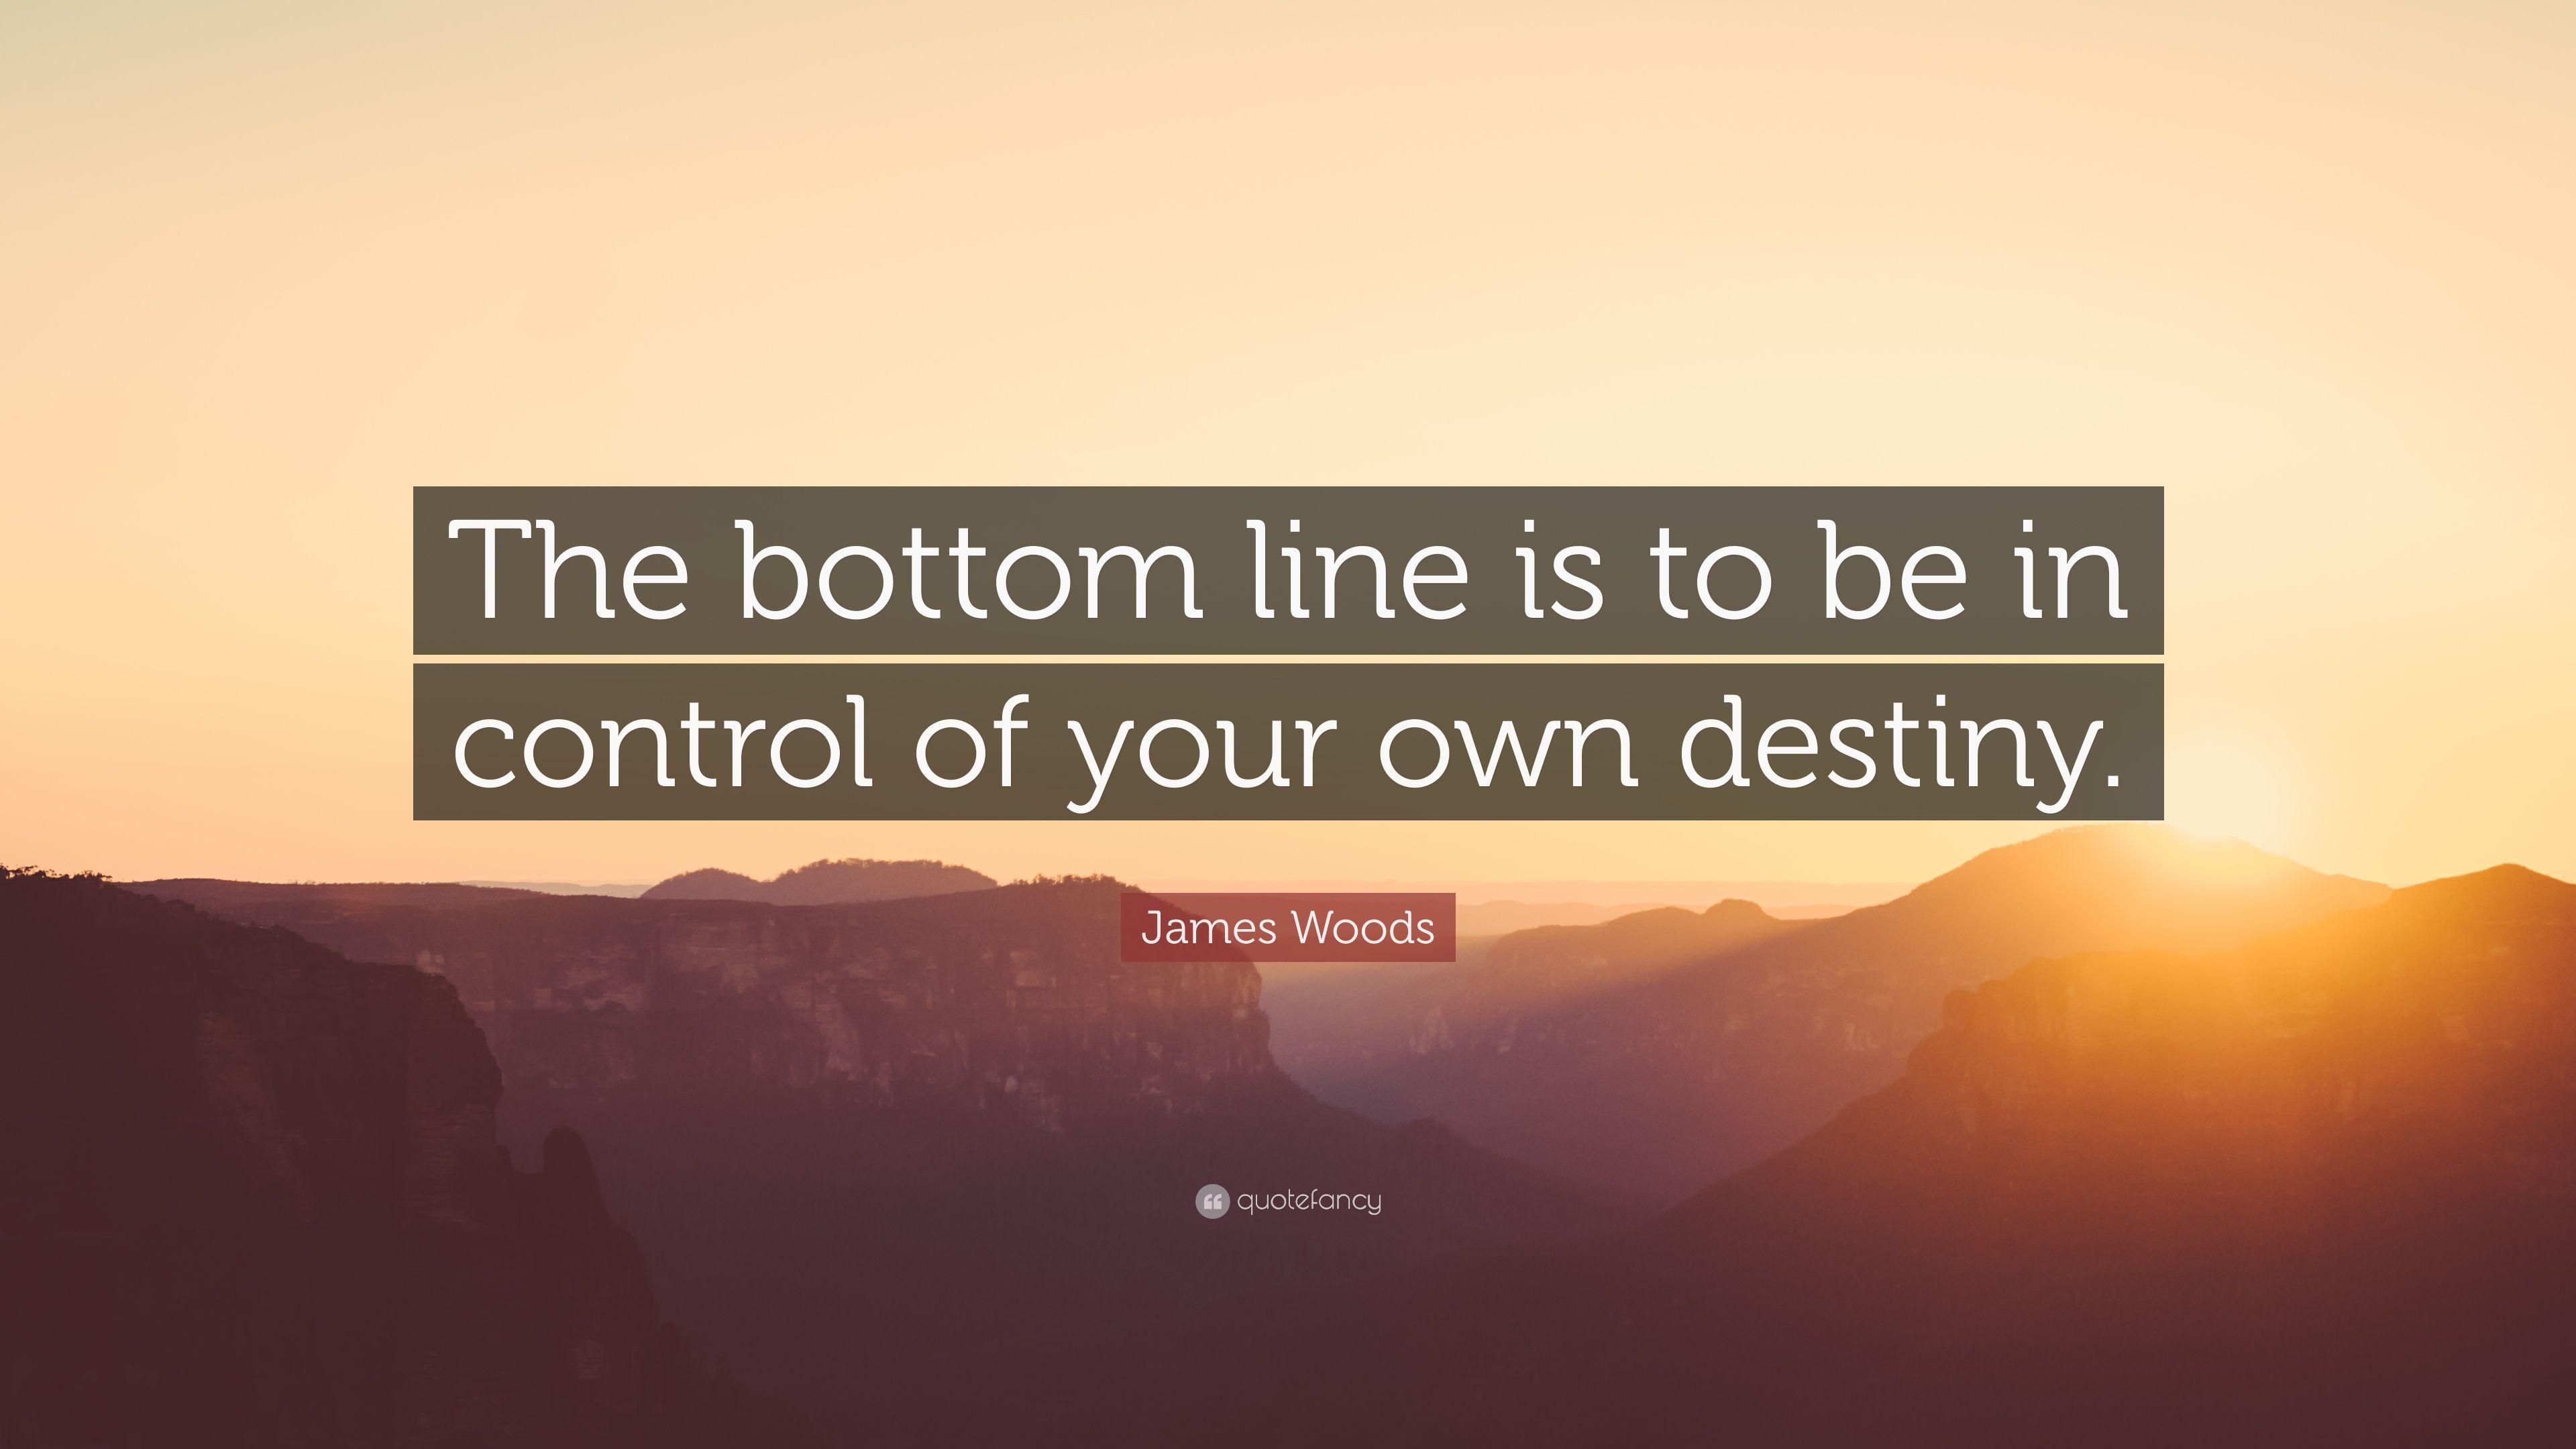 James Woods Quote: “The bottom line is to be in control of your